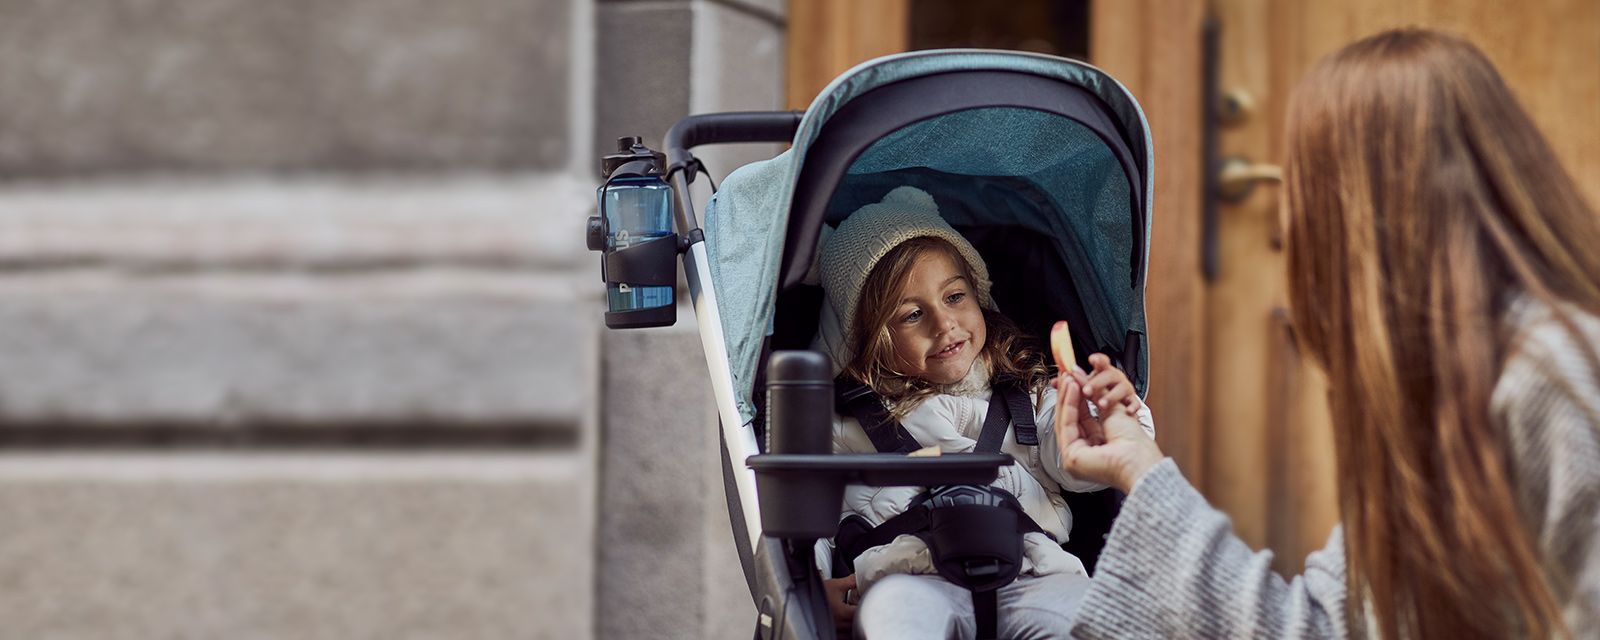 A woman hands a piece of apple to a child sitting in a thule stroller.